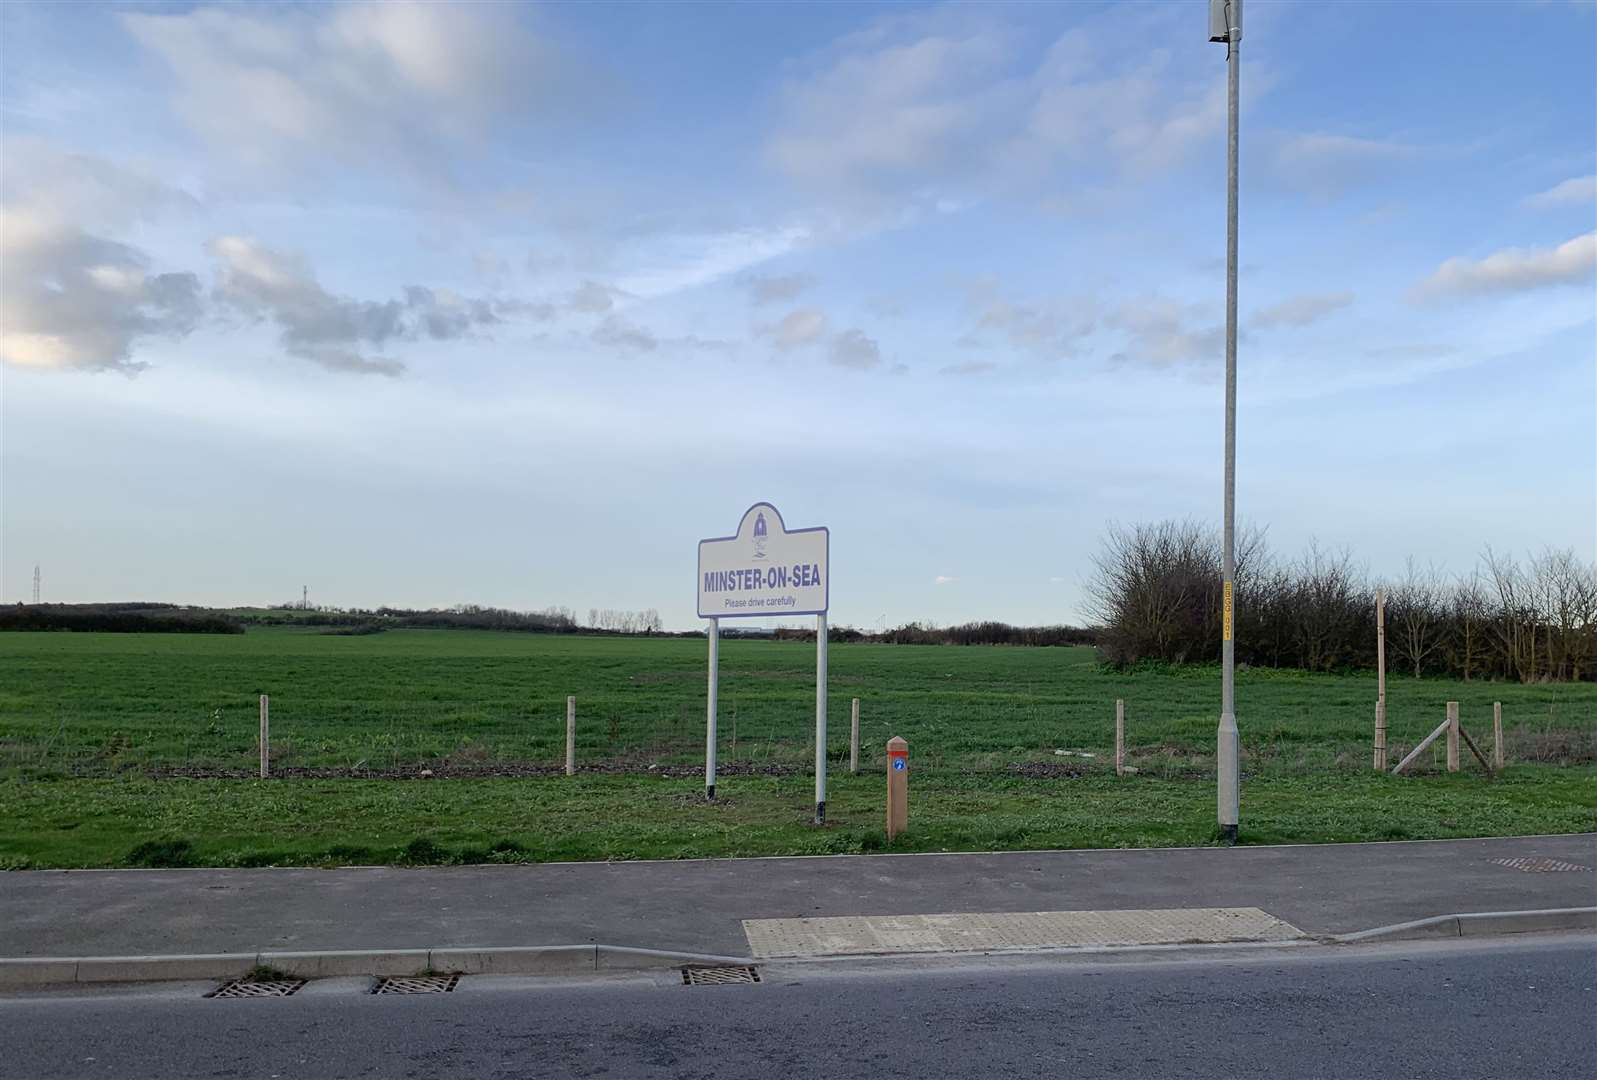 The site where planning permission for up to 700 homes at Barton Hill Drive, Minster, Sheppey